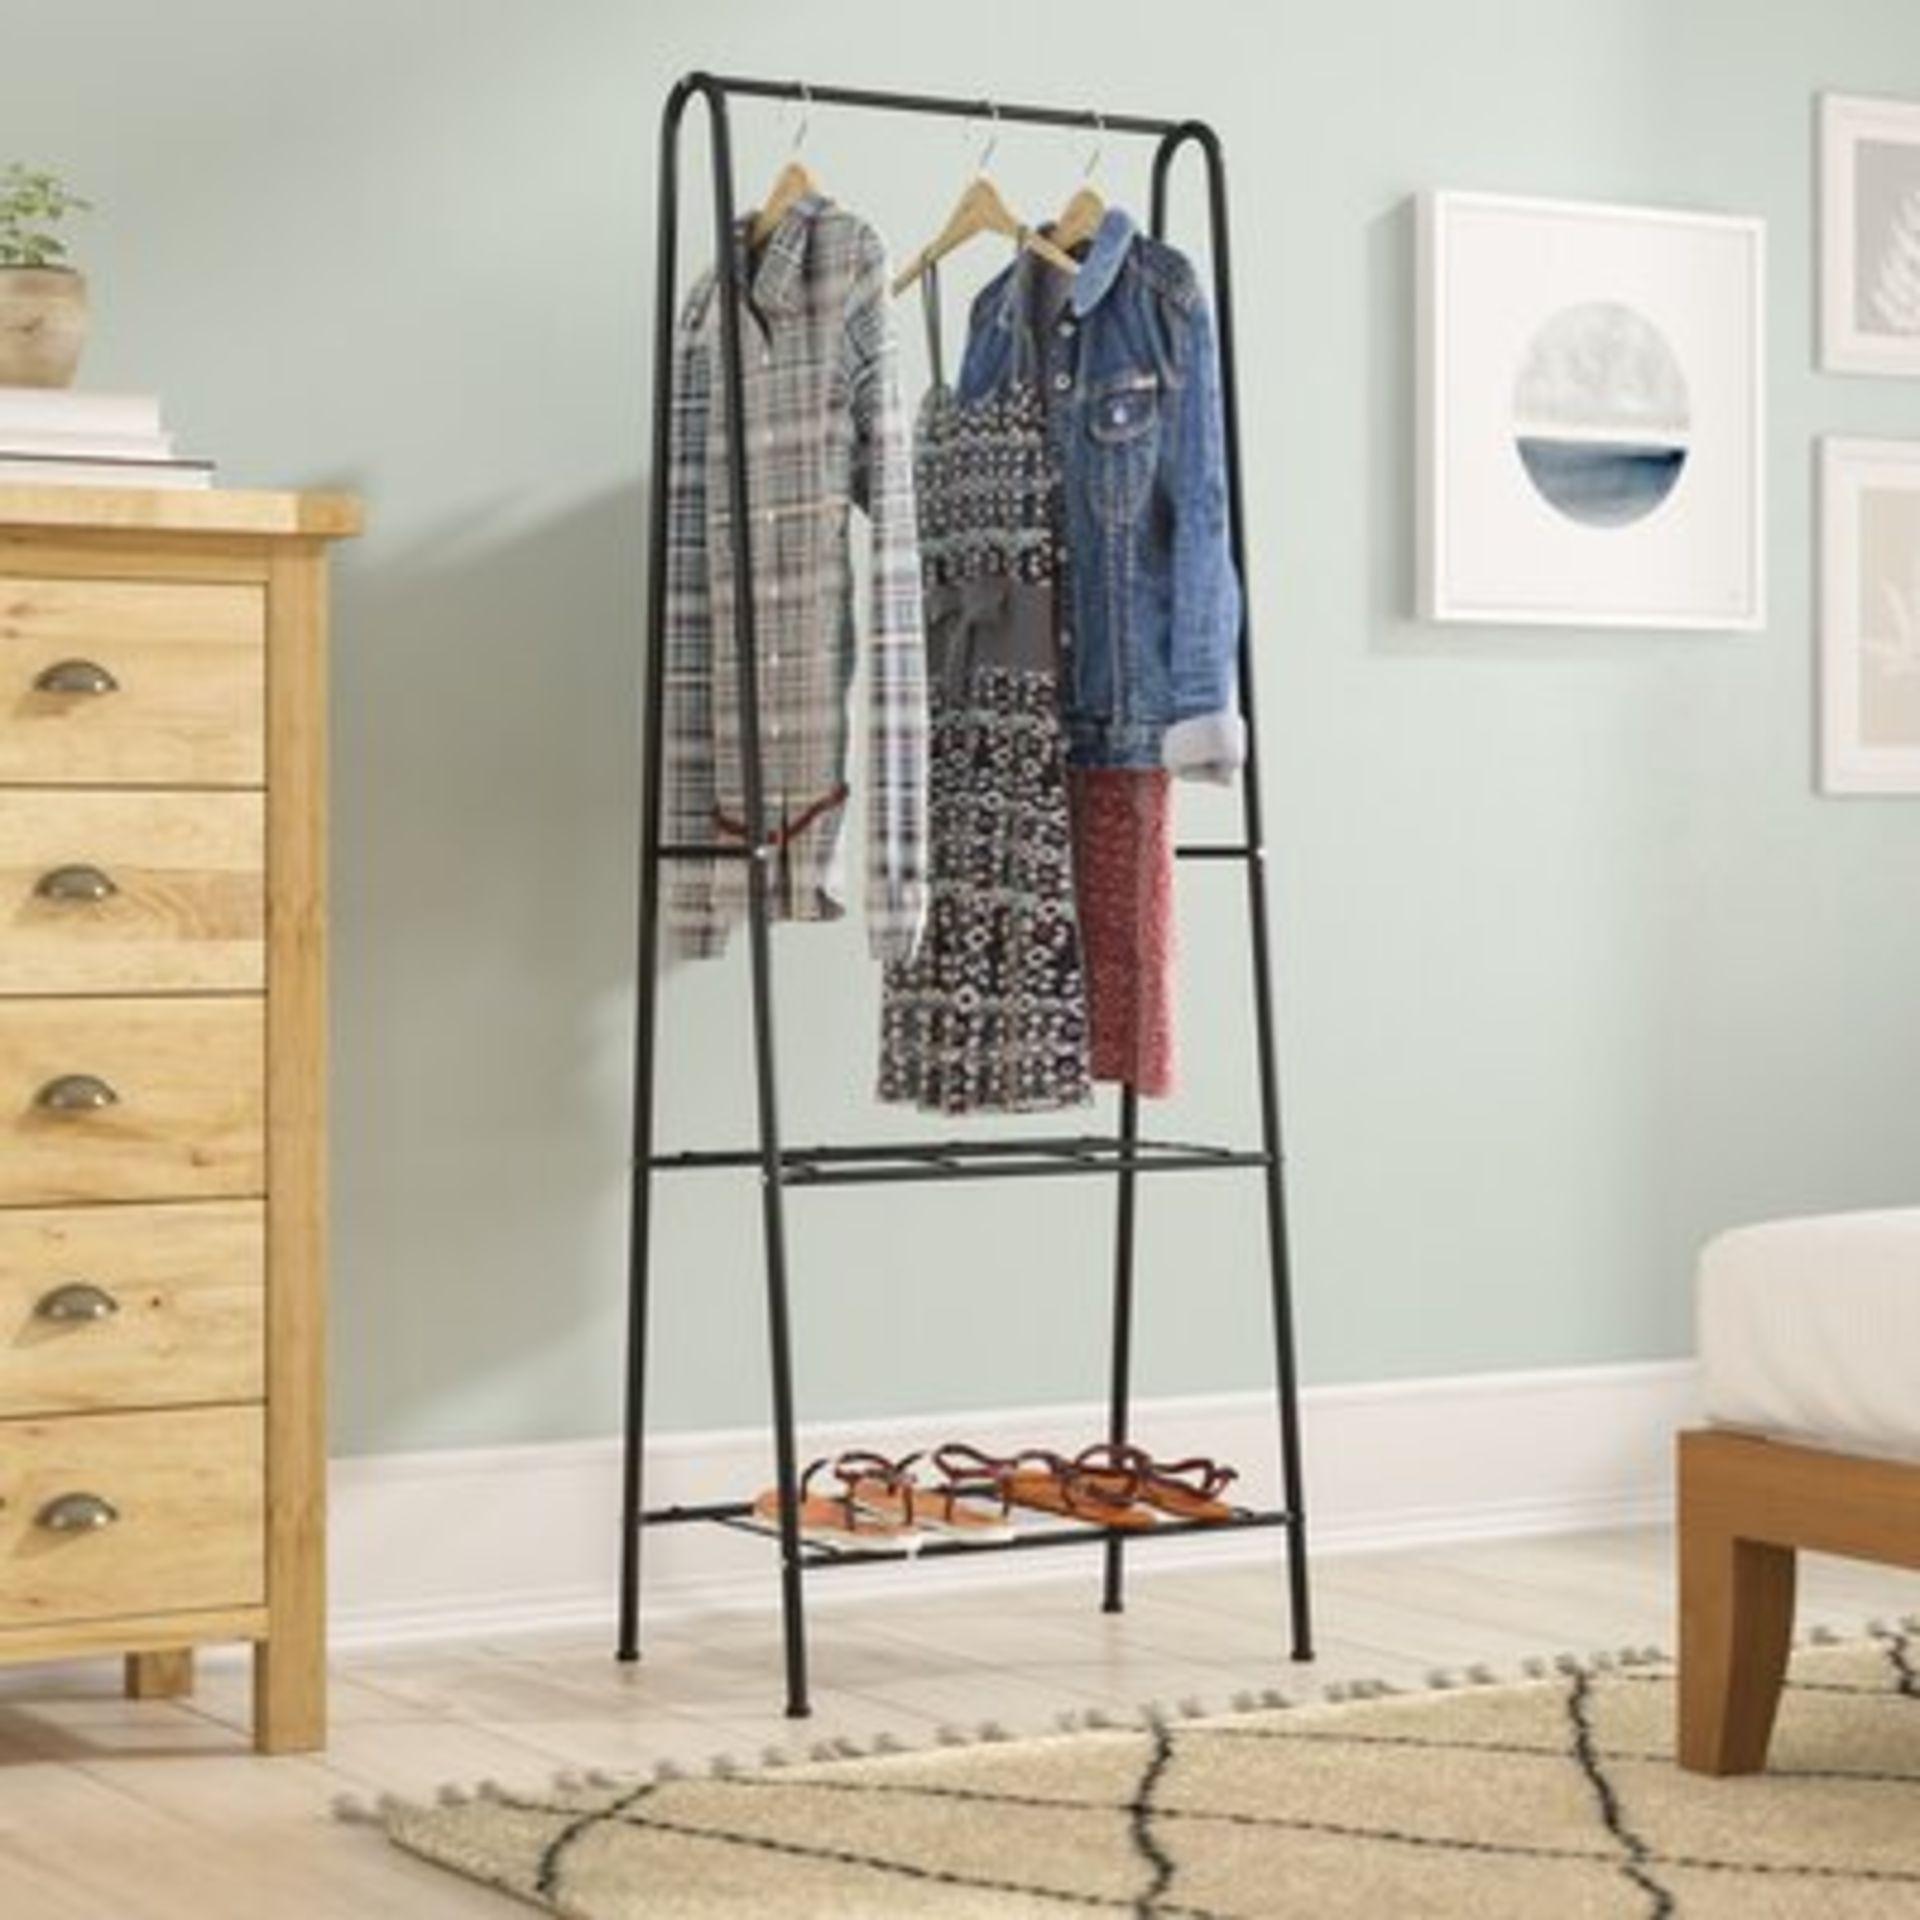 Tarbell 61.5cm wide clothes rack - RRP £48.99